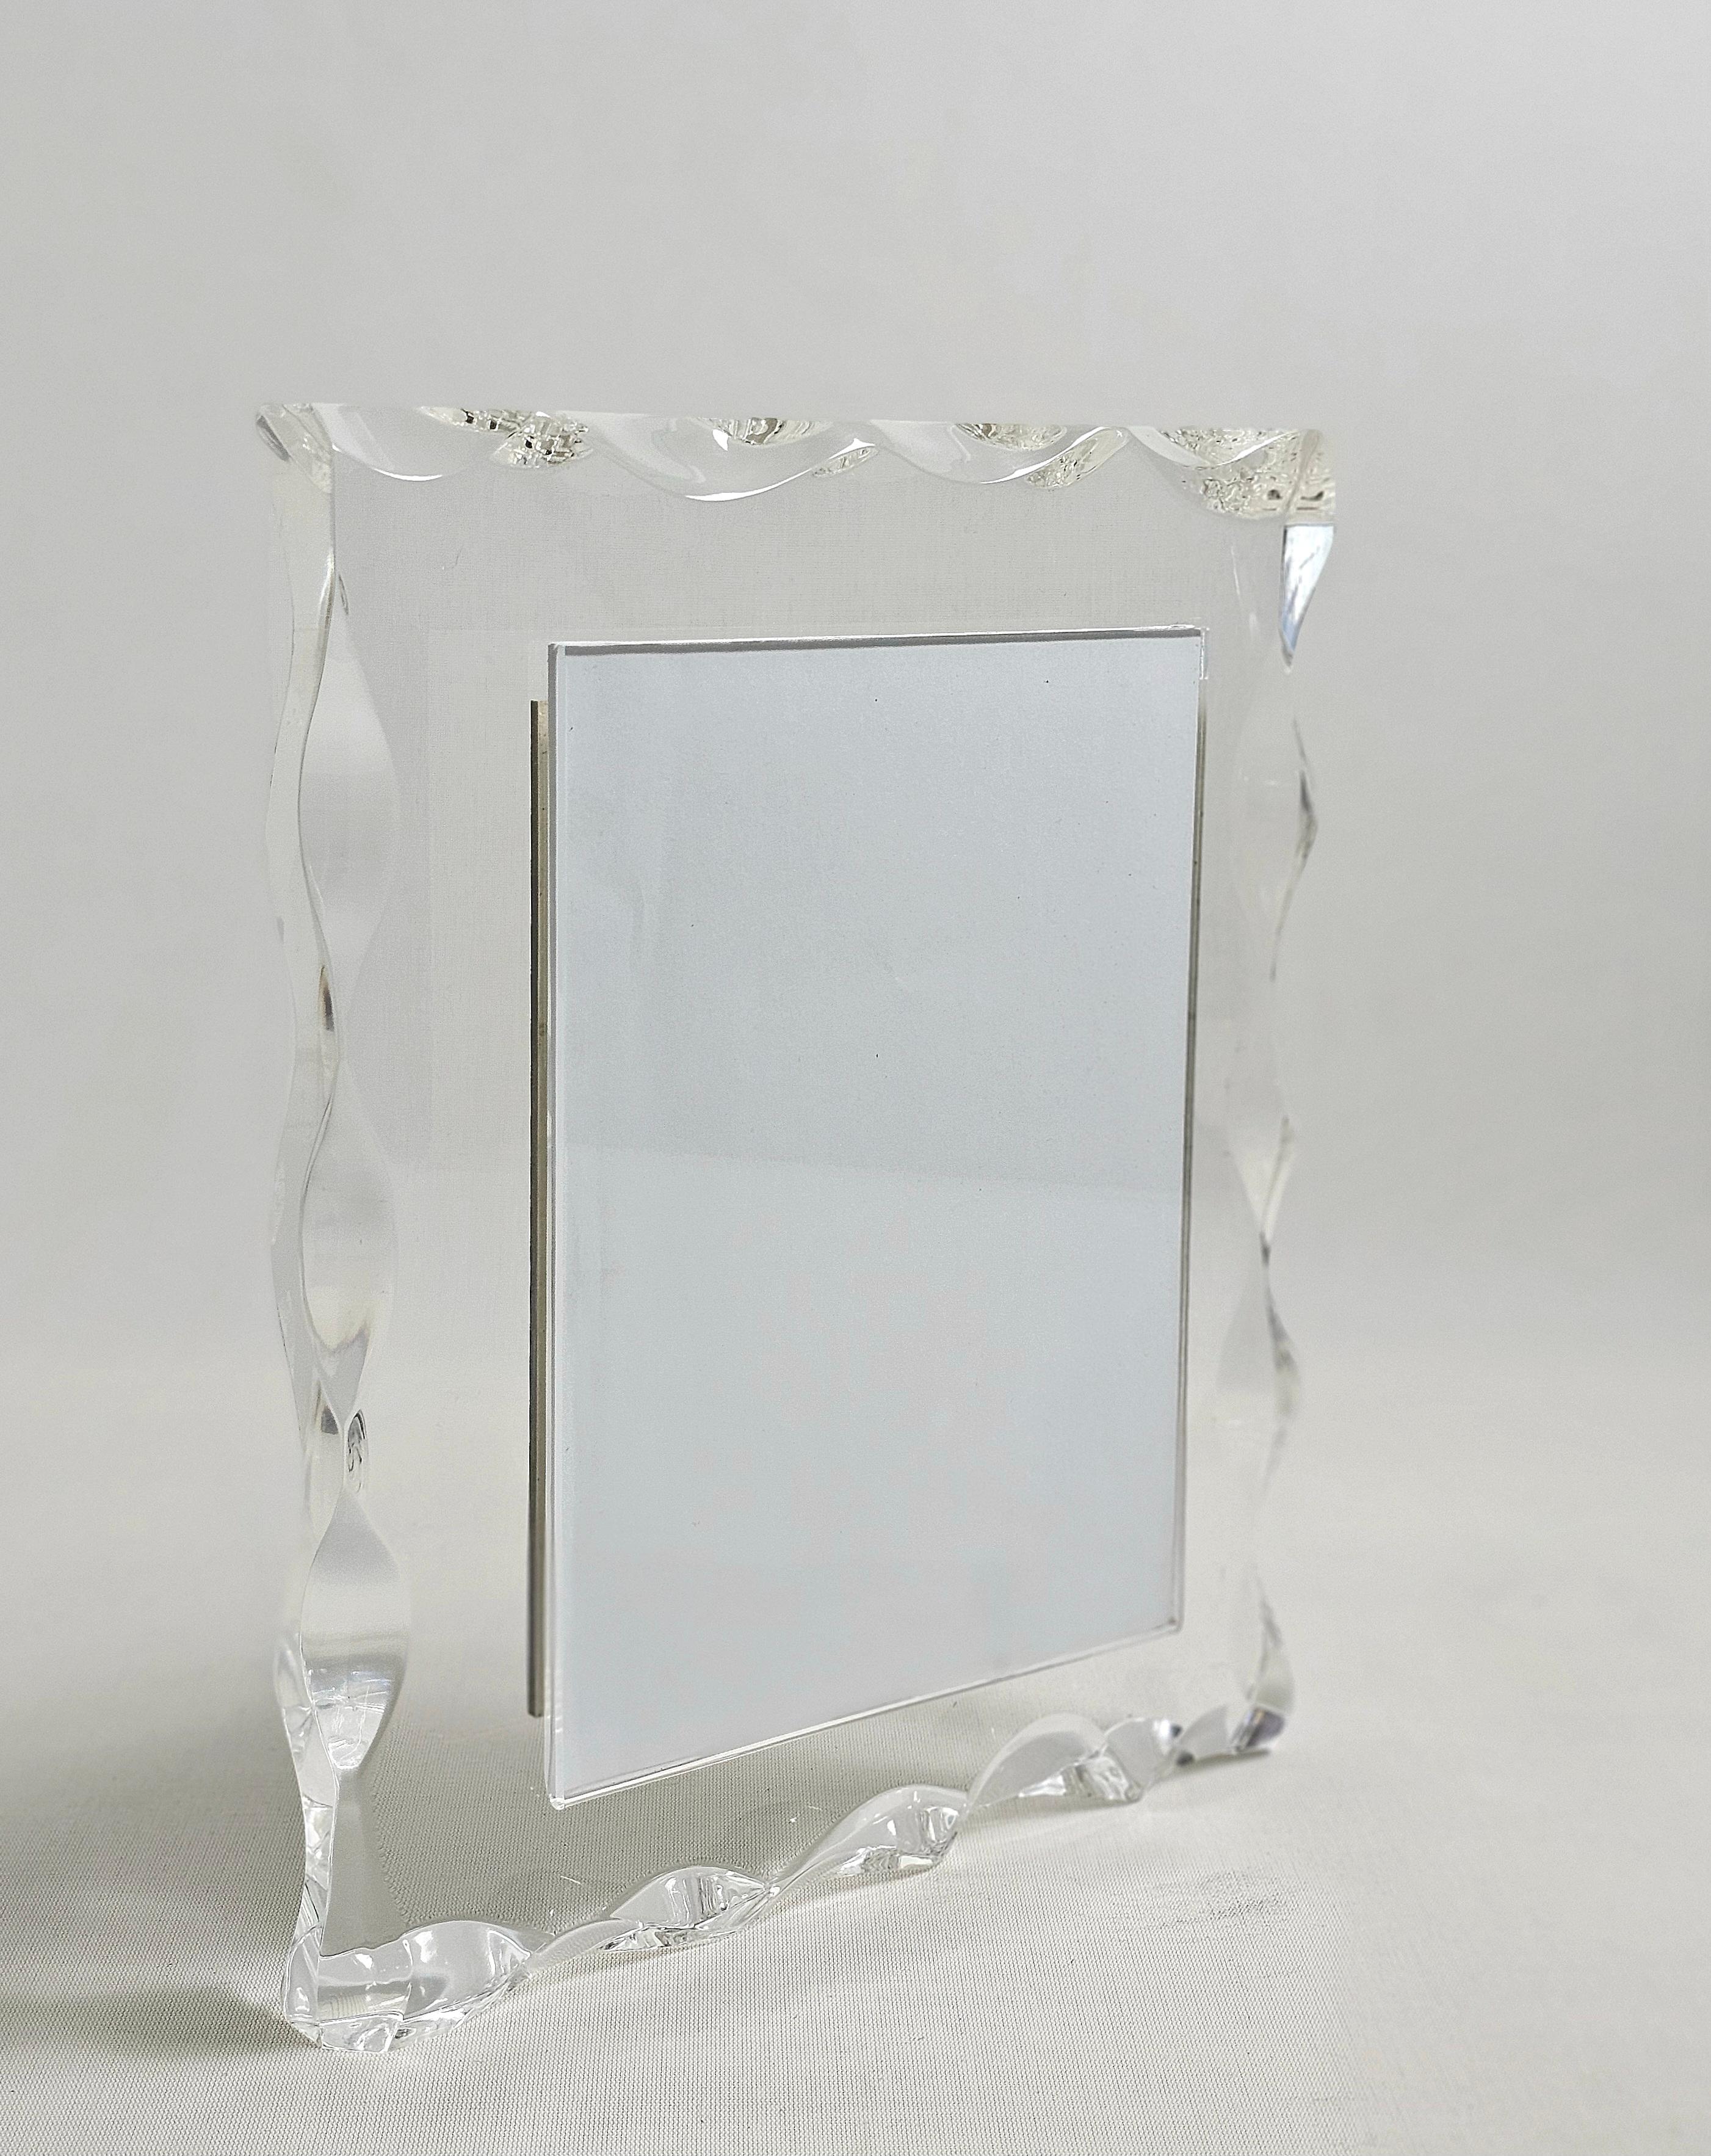 Decorative Object Picture Frame Plexglass Midcentury Italian Design 1980s In Excellent Condition For Sale In Palermo, IT